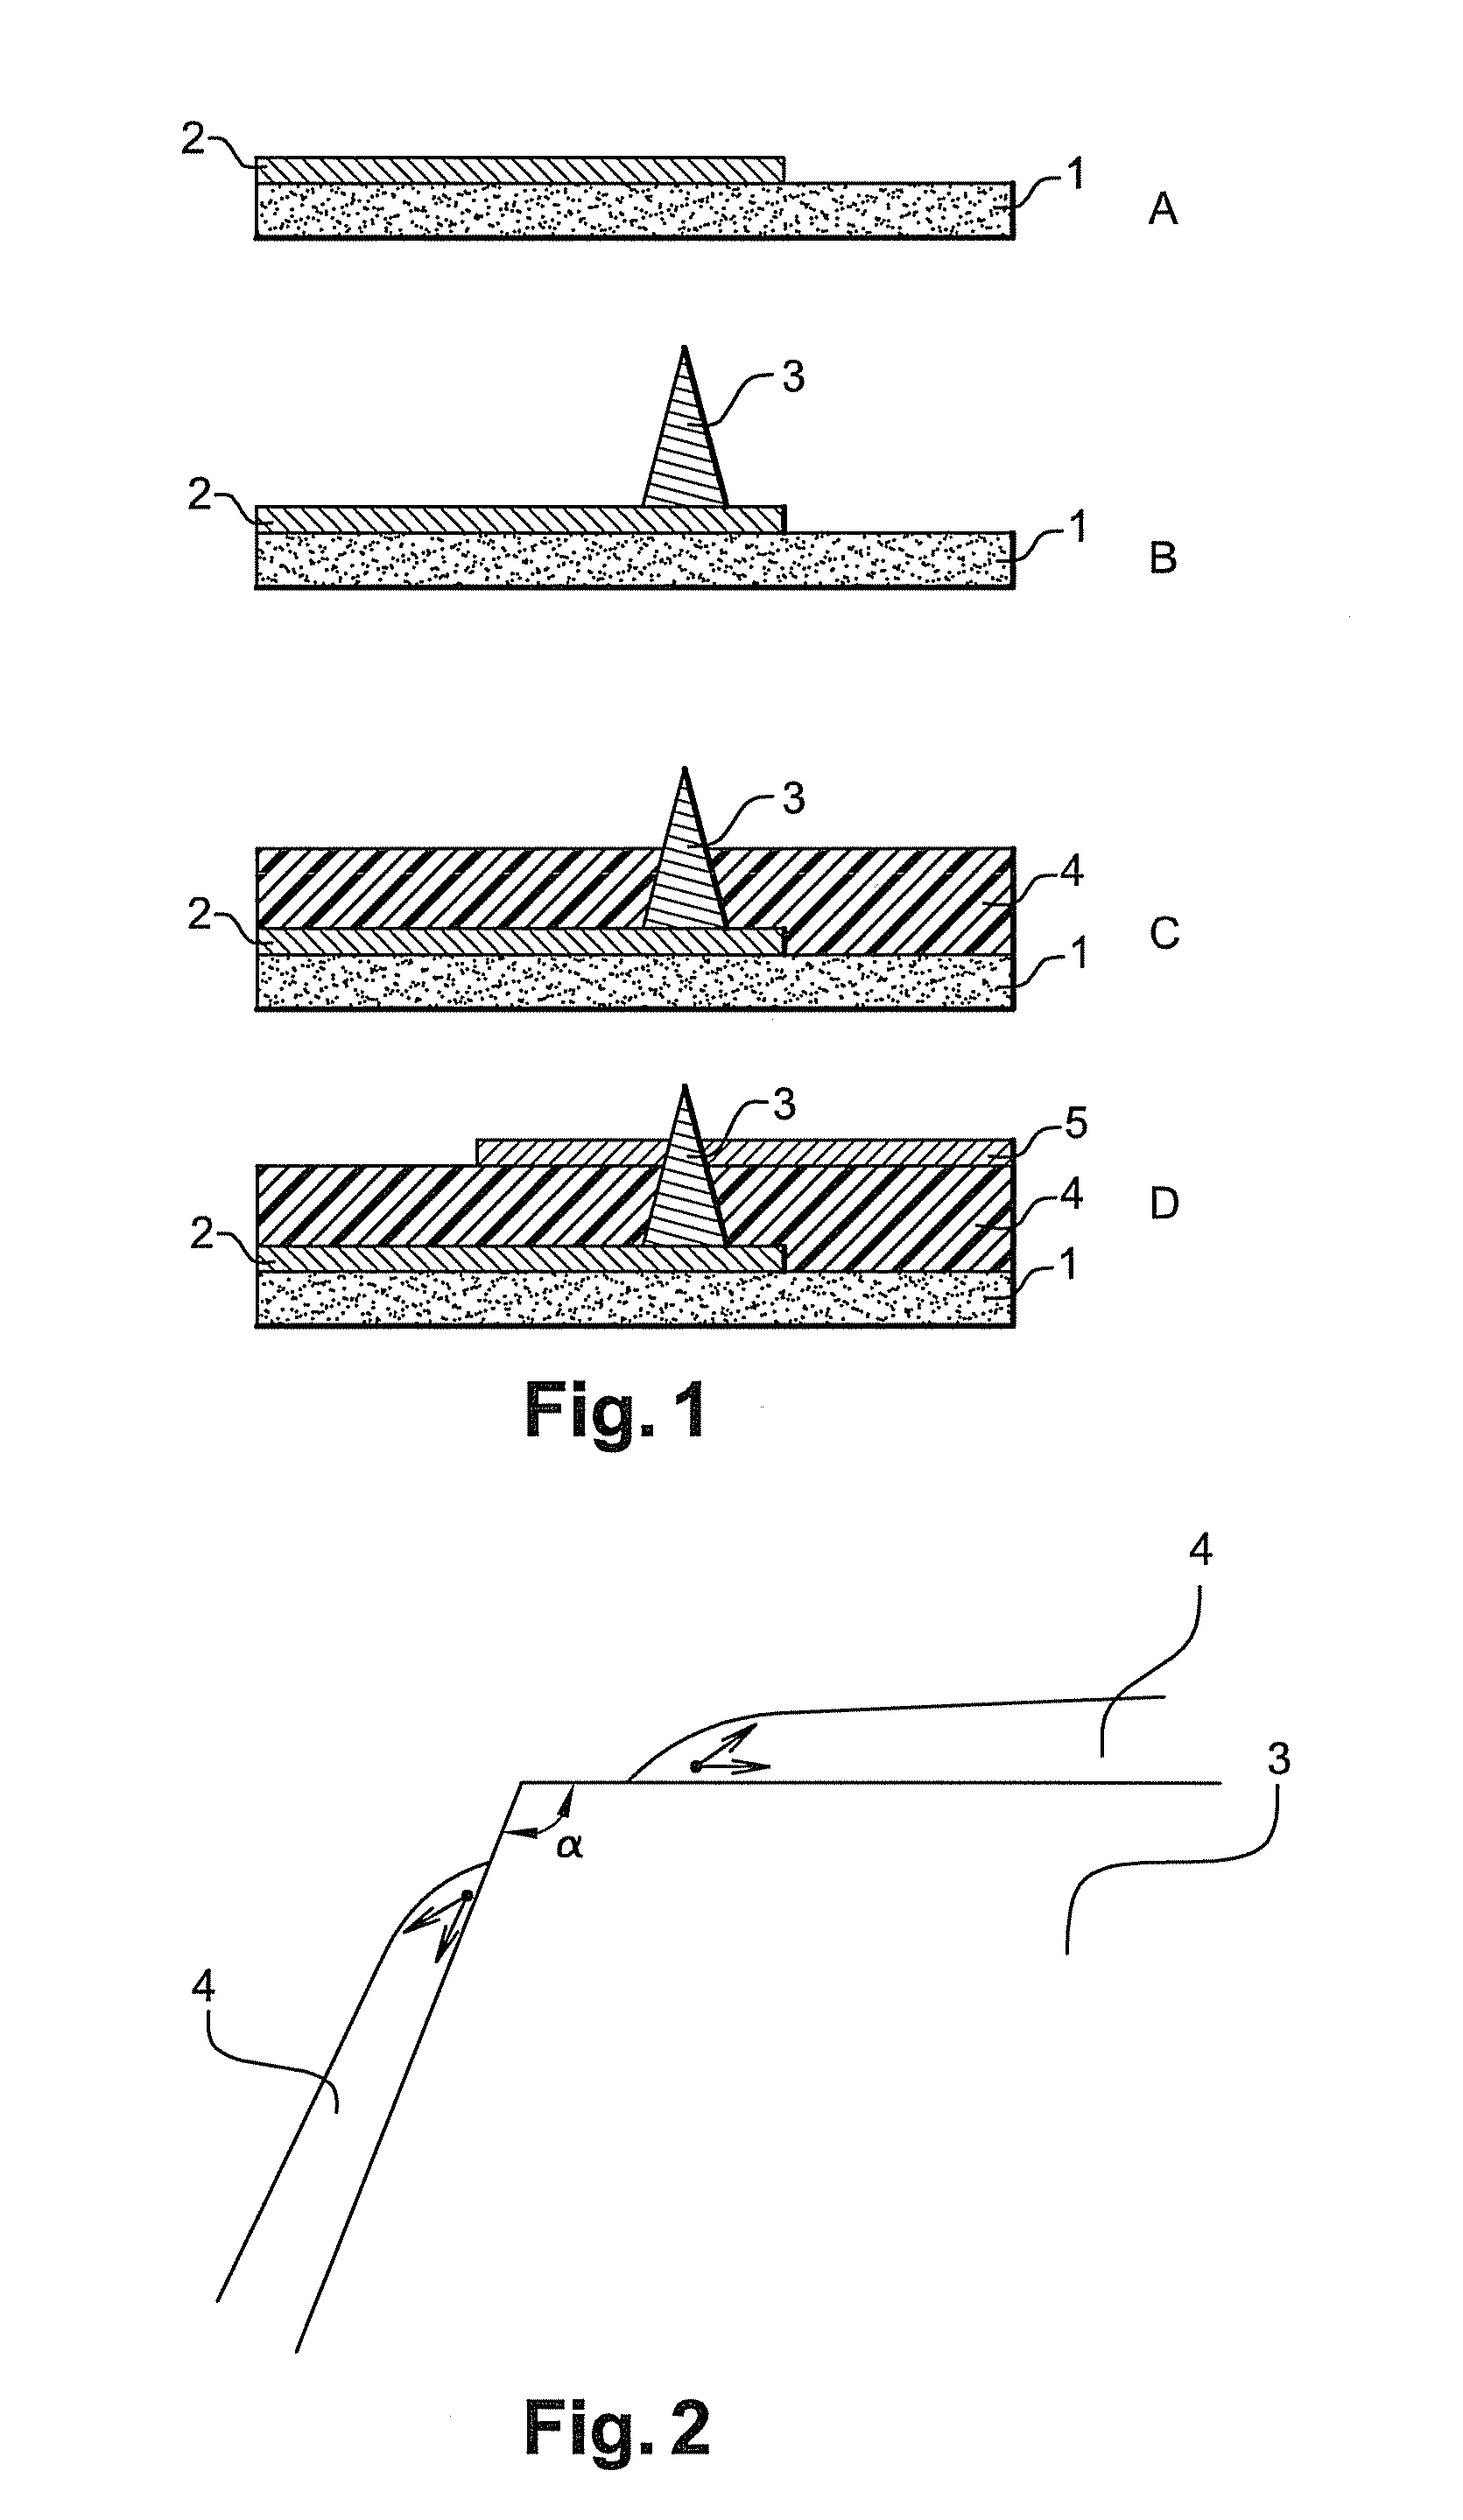 Method for making an electric interconnection between two conducting layers